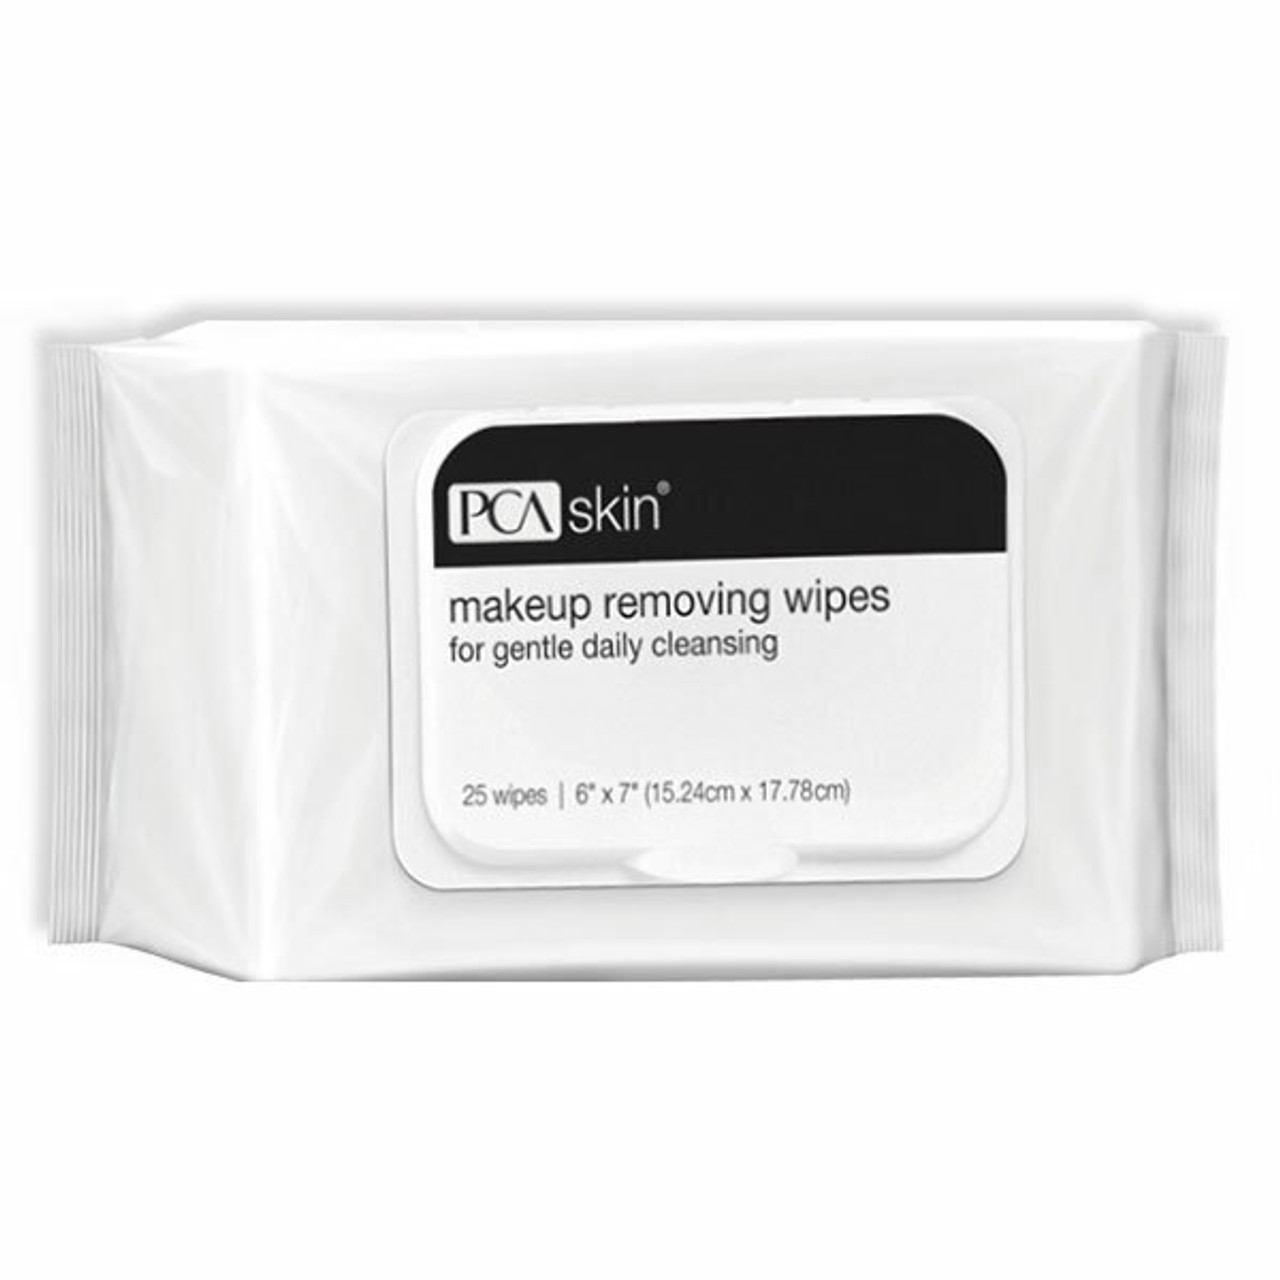 PCA Skin Makeup Removing Wipes - 25 wipes